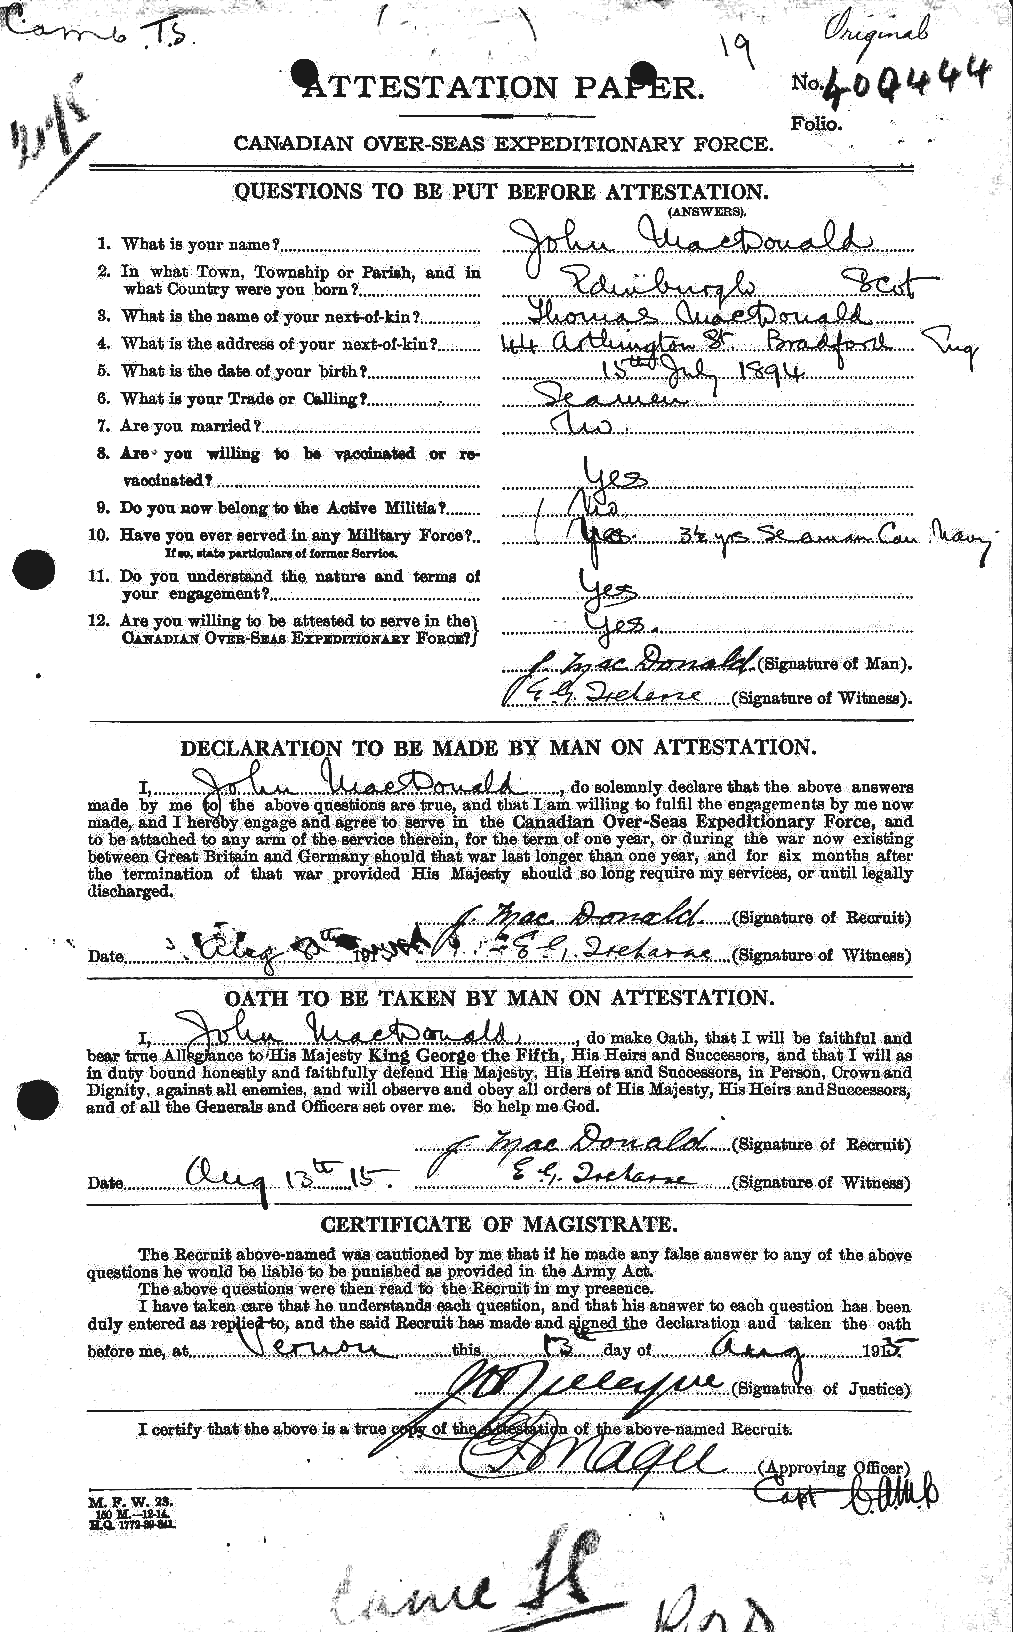 Personnel Records of the First World War - CEF 532262a